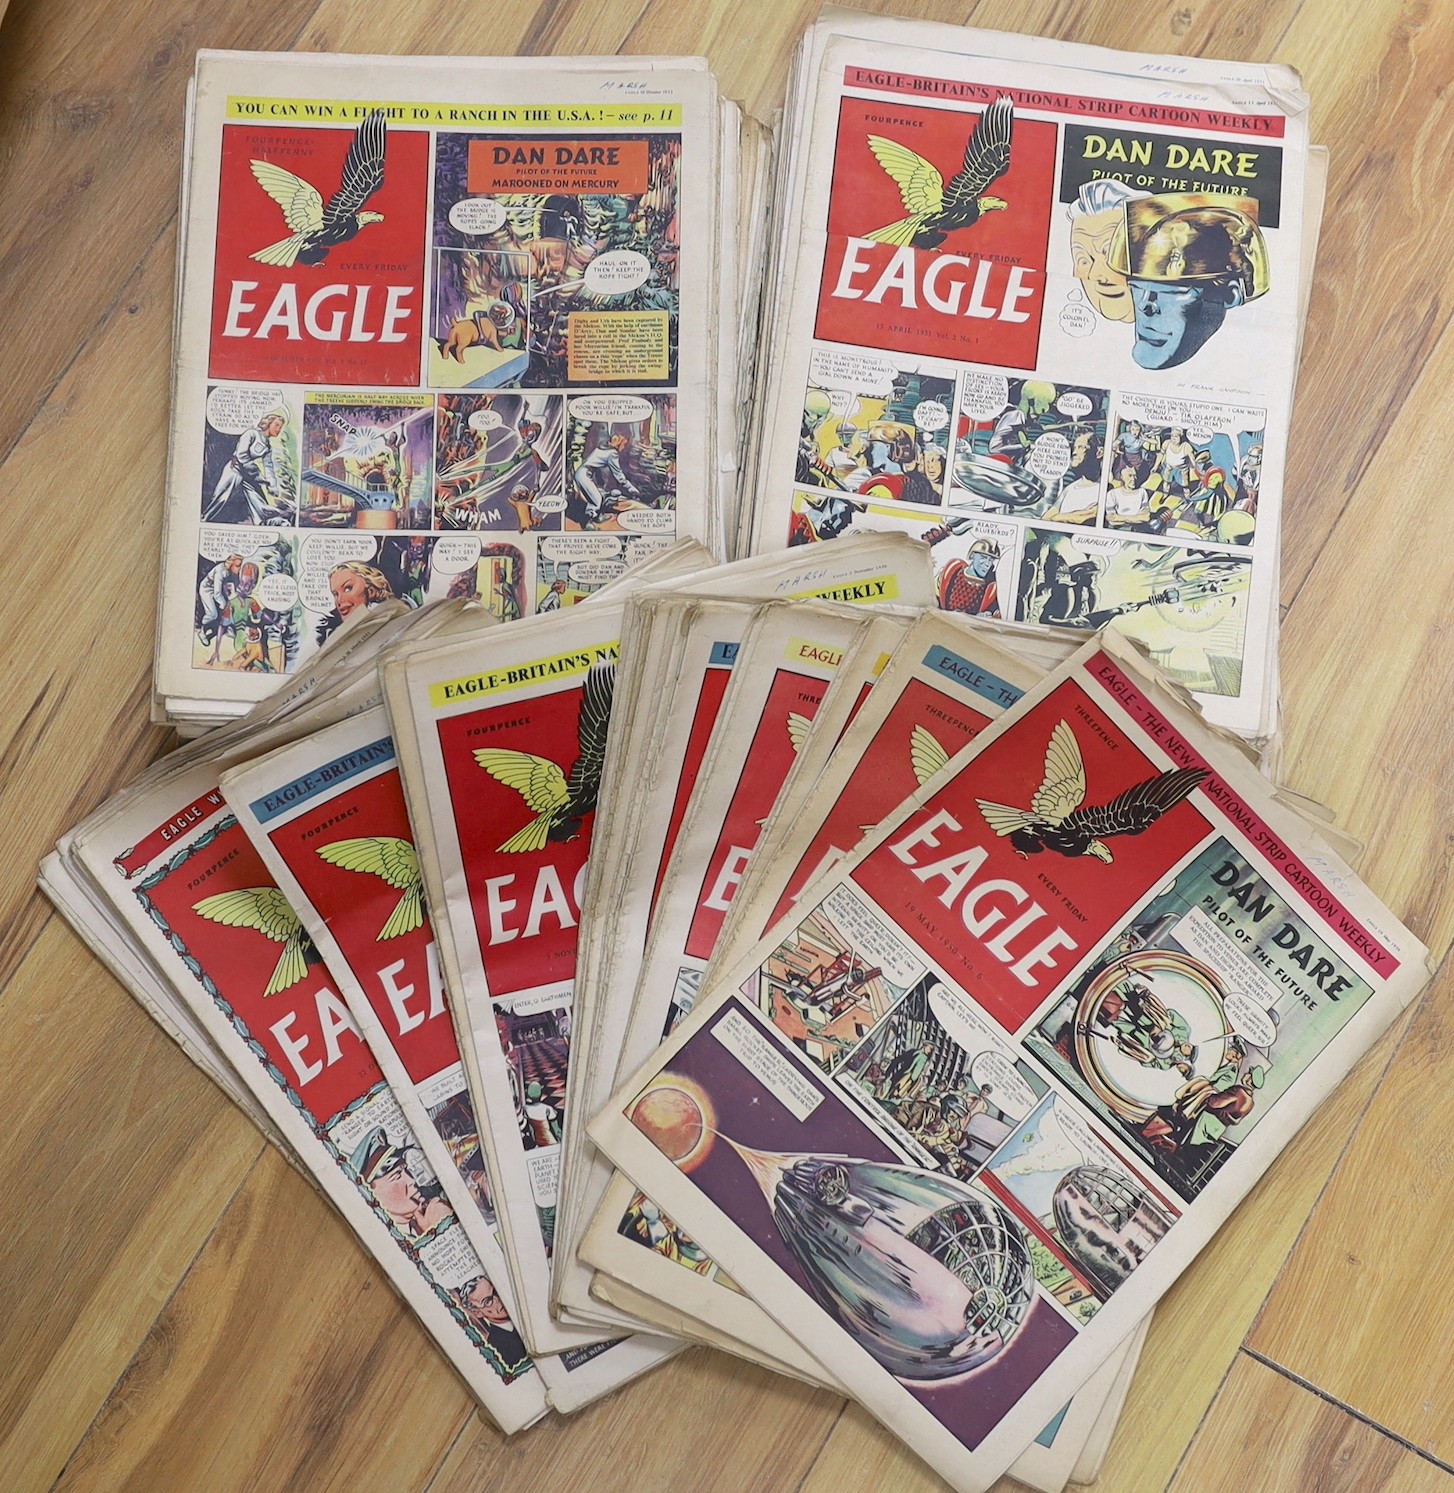 Eagle Comics, from Vol. 1, no. 6, May 1950, to Vol. 5, 1954, a near-complete run